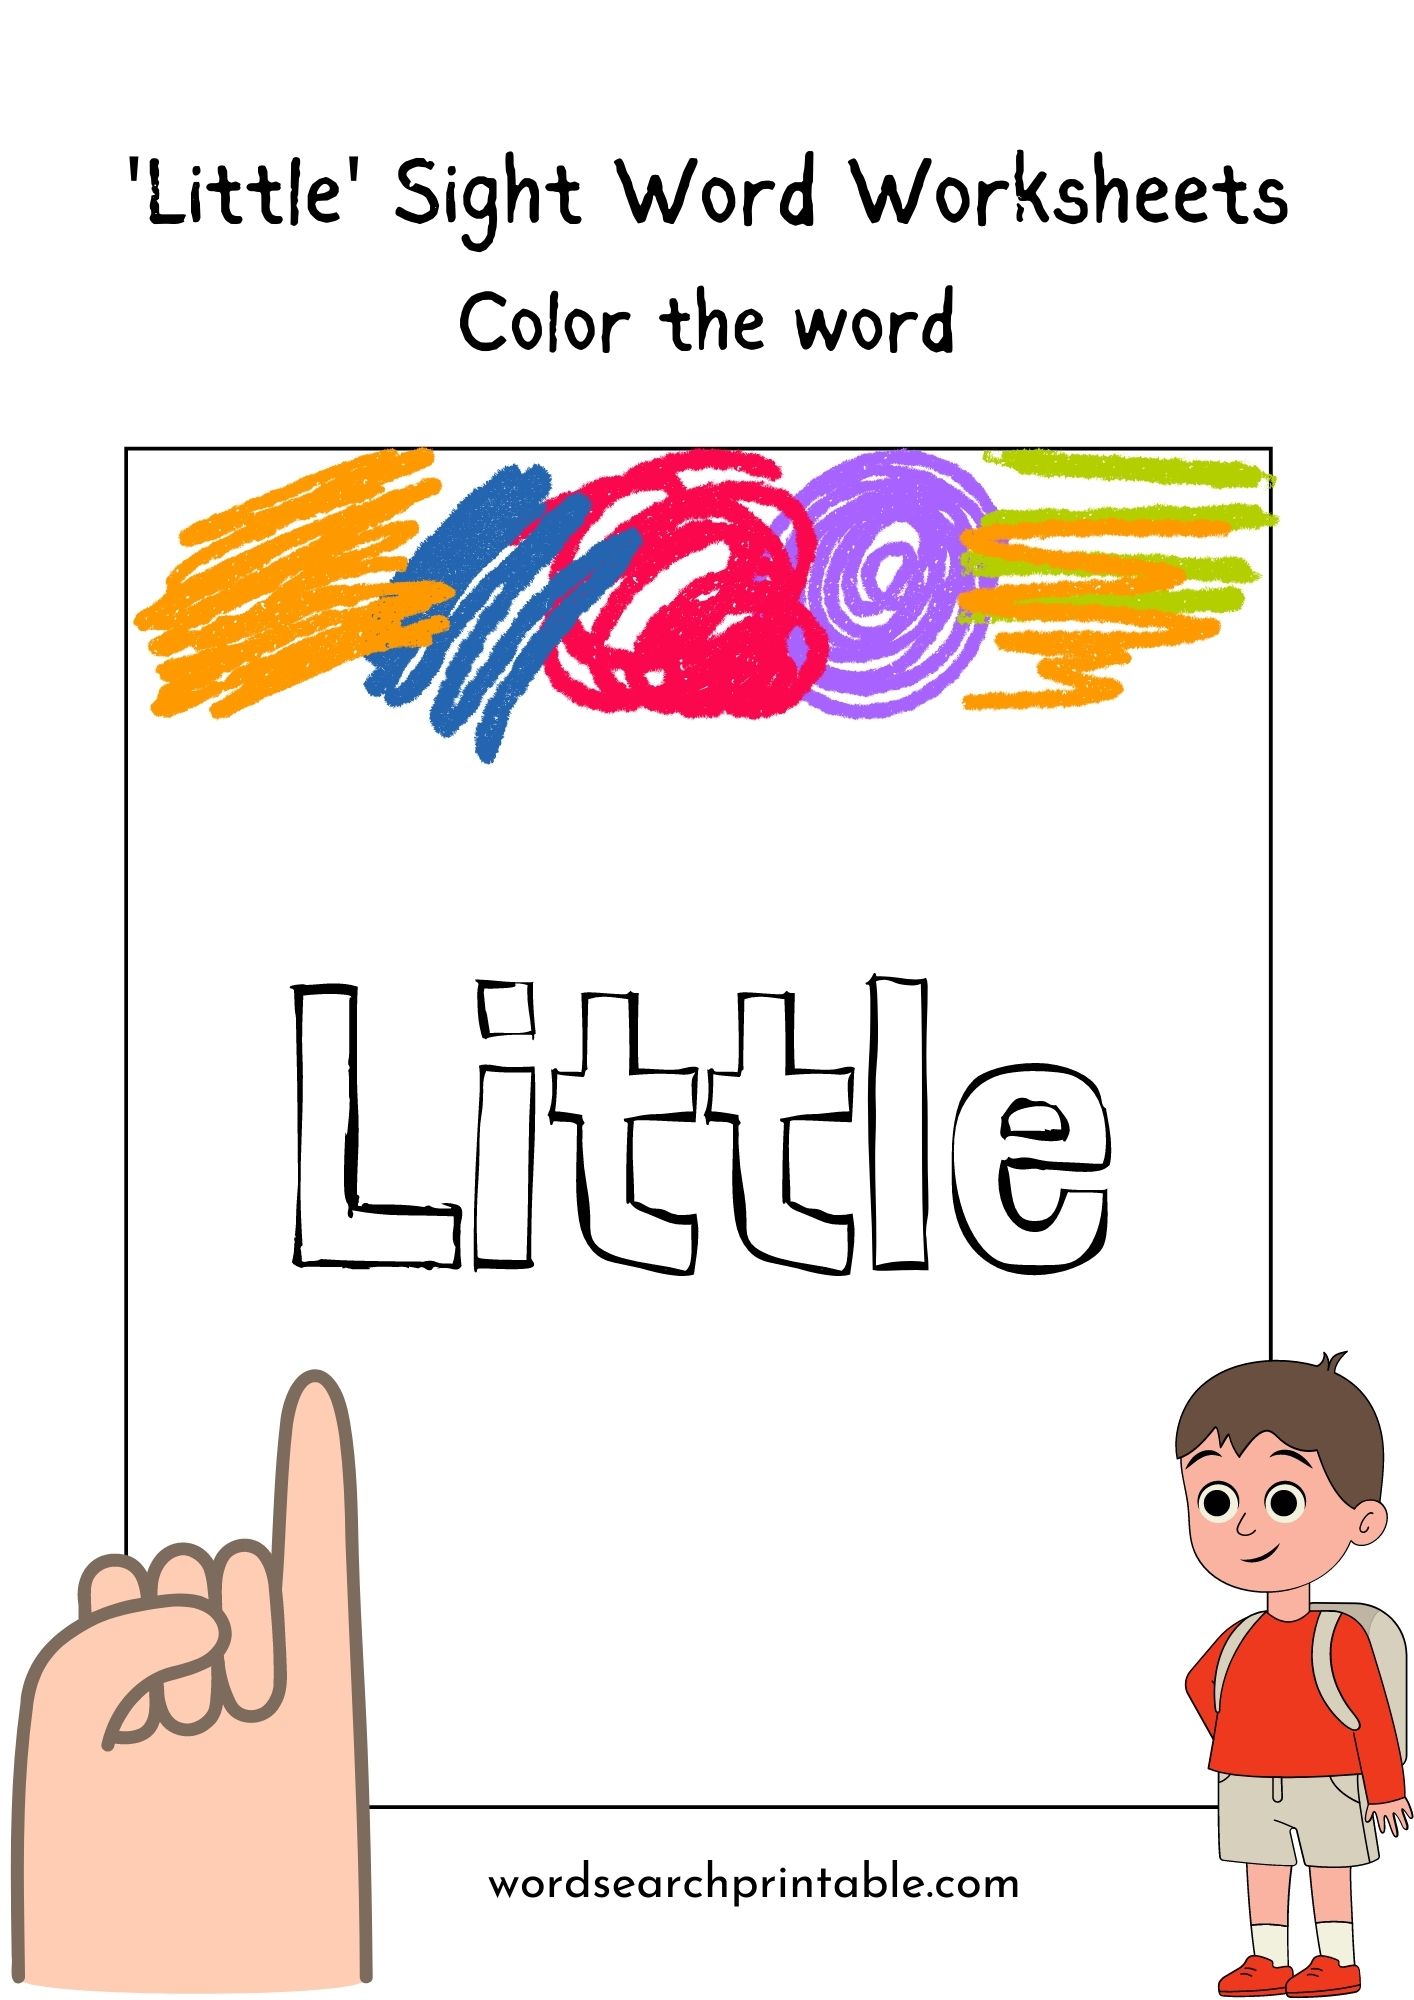 Color the sight word “Little”